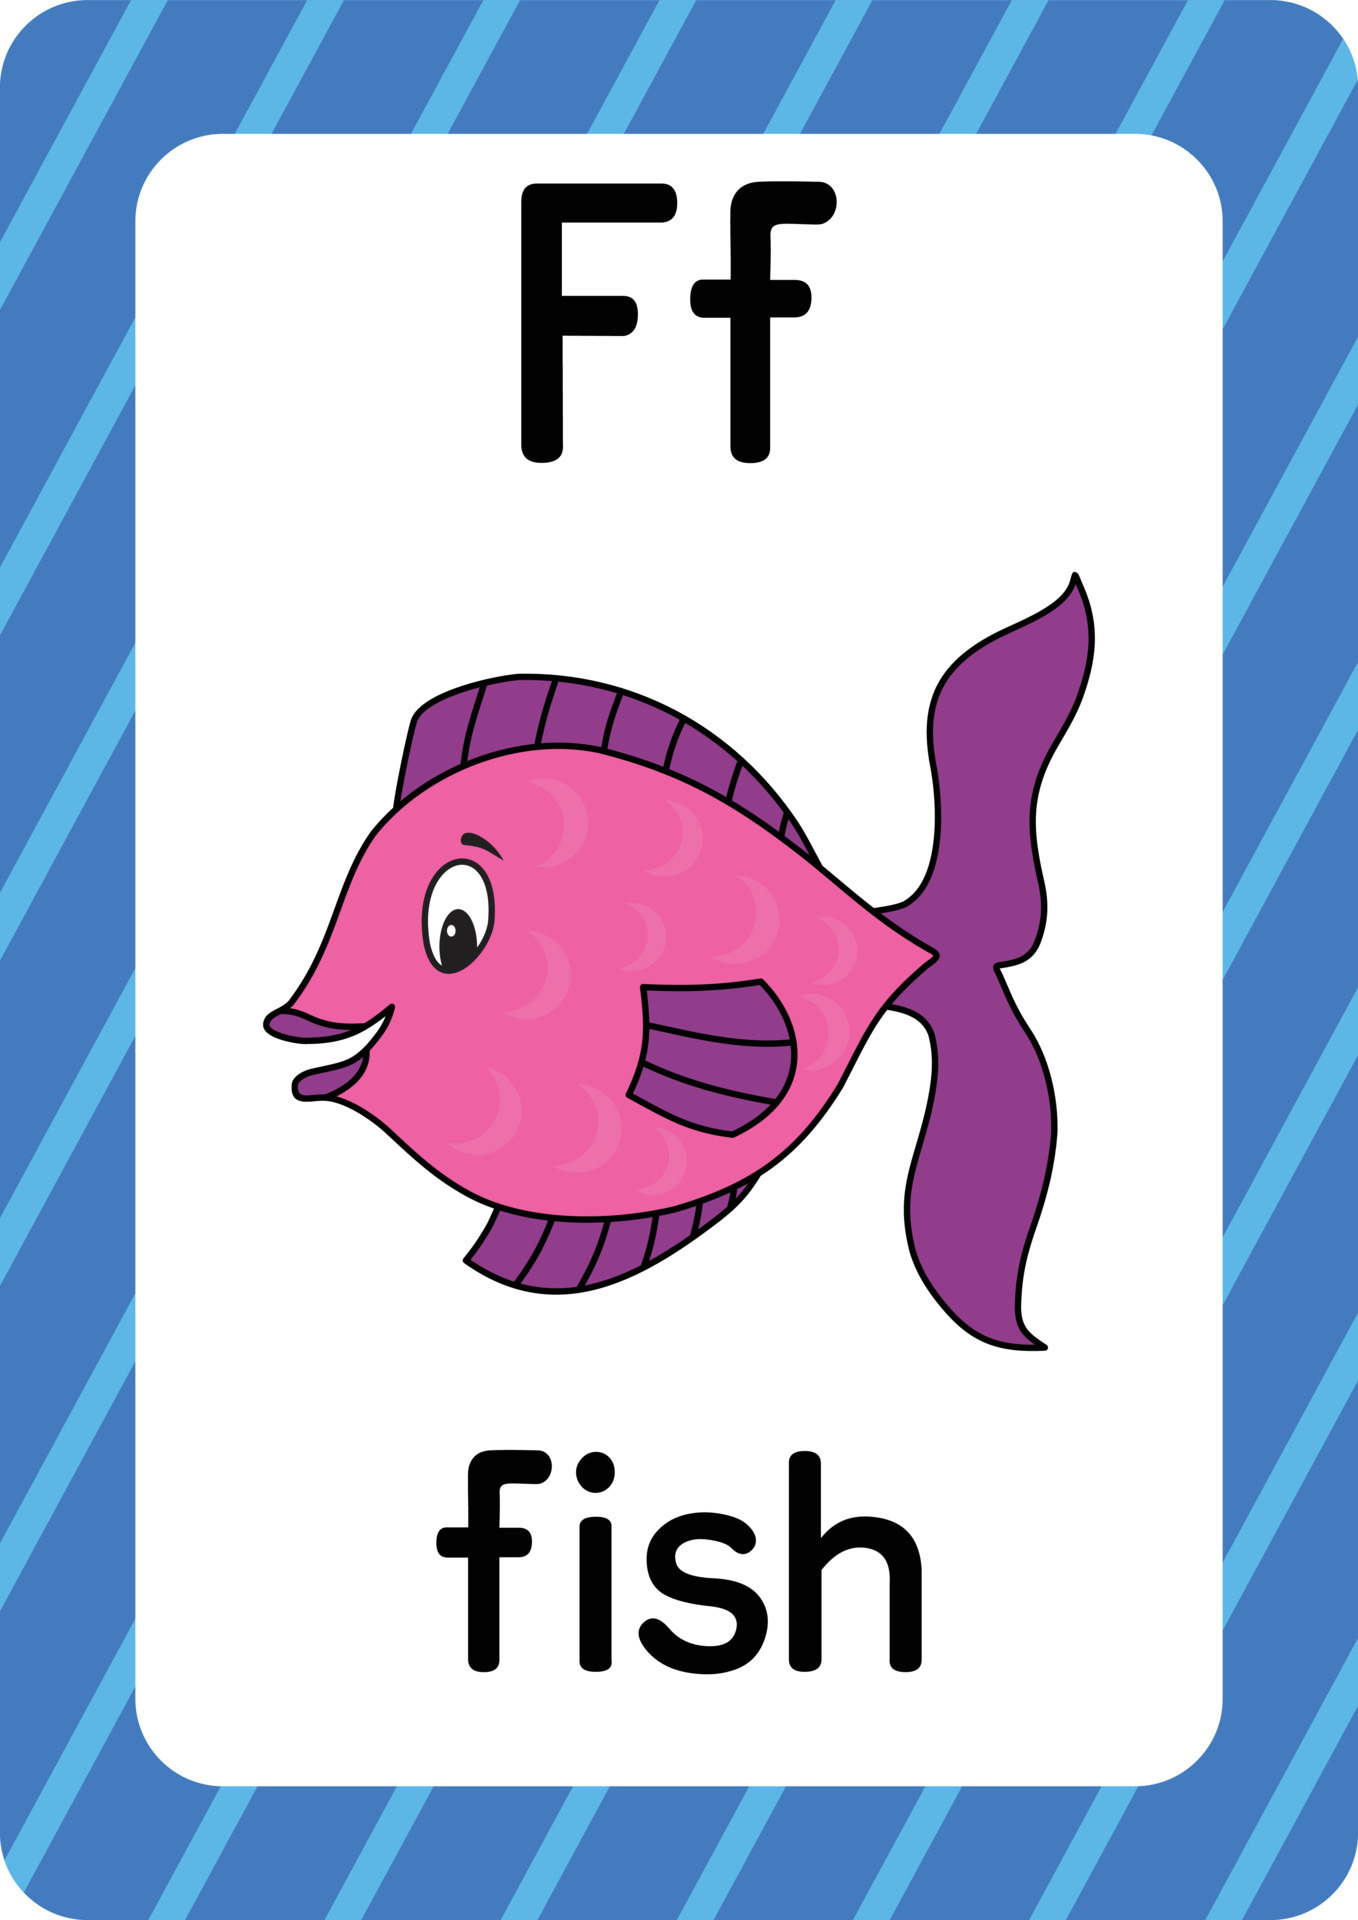 https://static.vecteezy.com/system/resources/previews/011/976/542/original/fish-isolated-on-white-background-letter-f-flashcard-fish-cartoon-vector.jpg